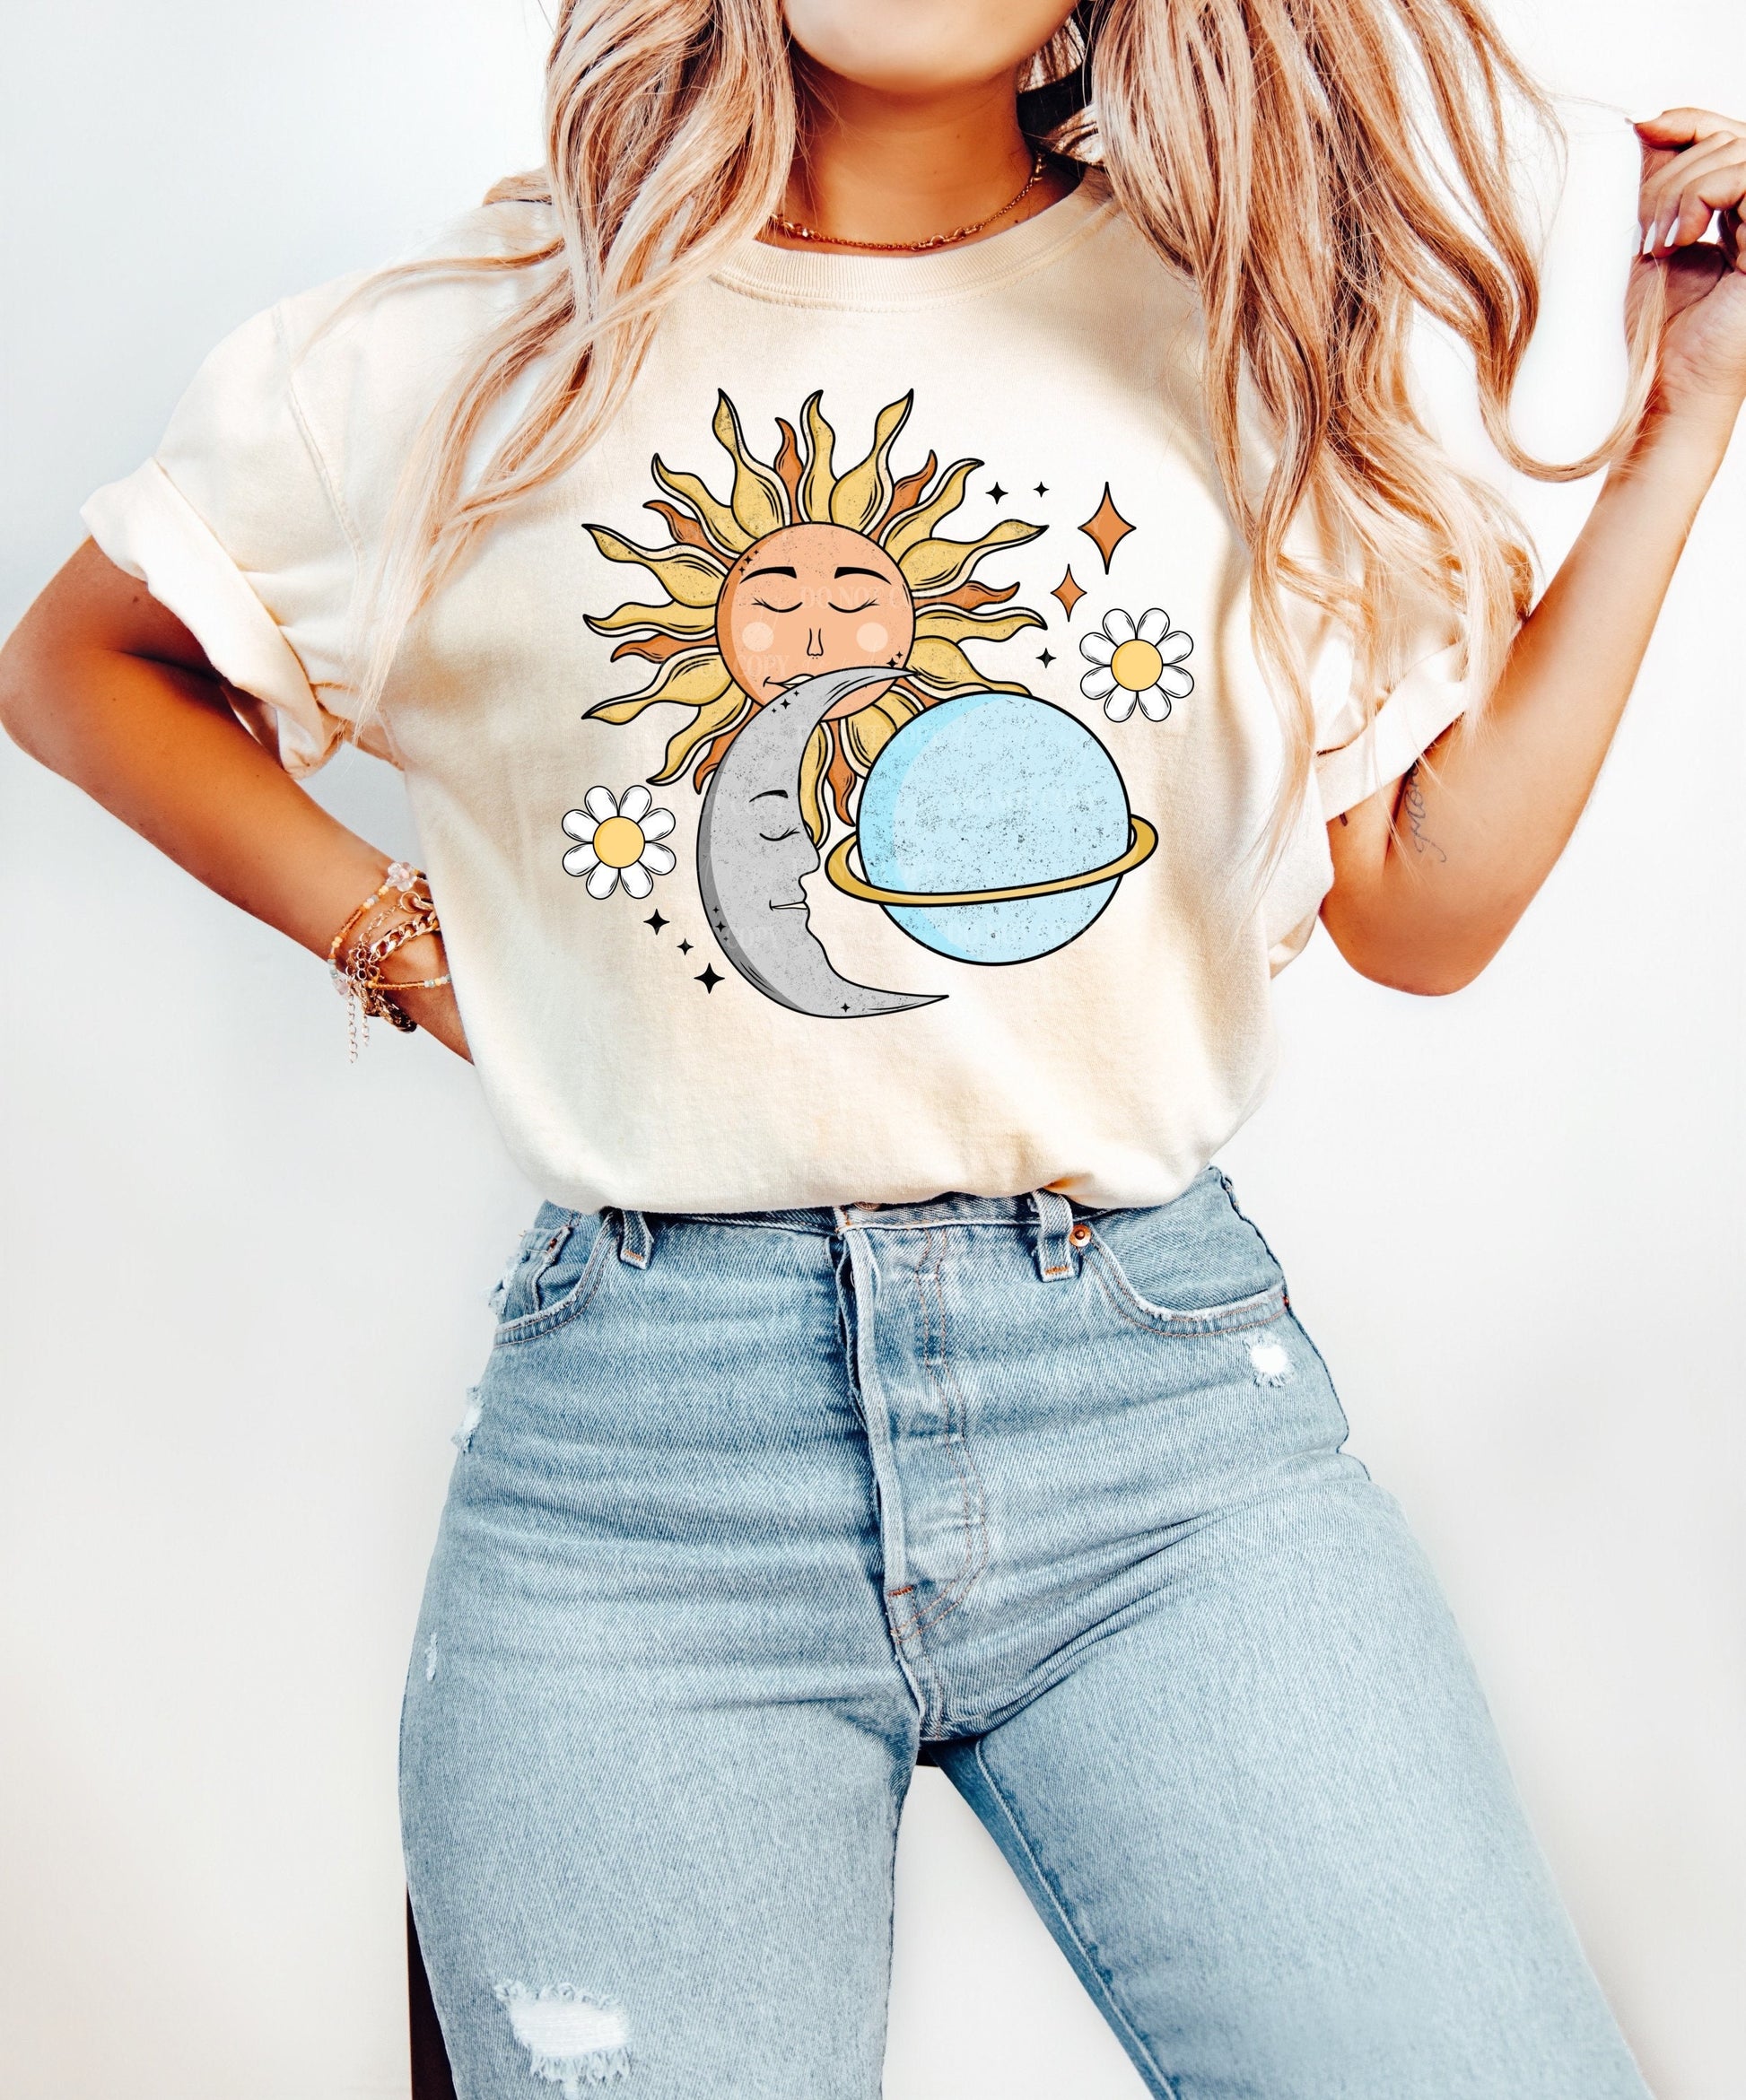 Sun Moon Vibes Shirt, Nature Lover, Outdoor Fun, Forest Wanderer, Wildlife Theme, Nature Inspired Shirt, Cozy Shirt, Whimsical Tee